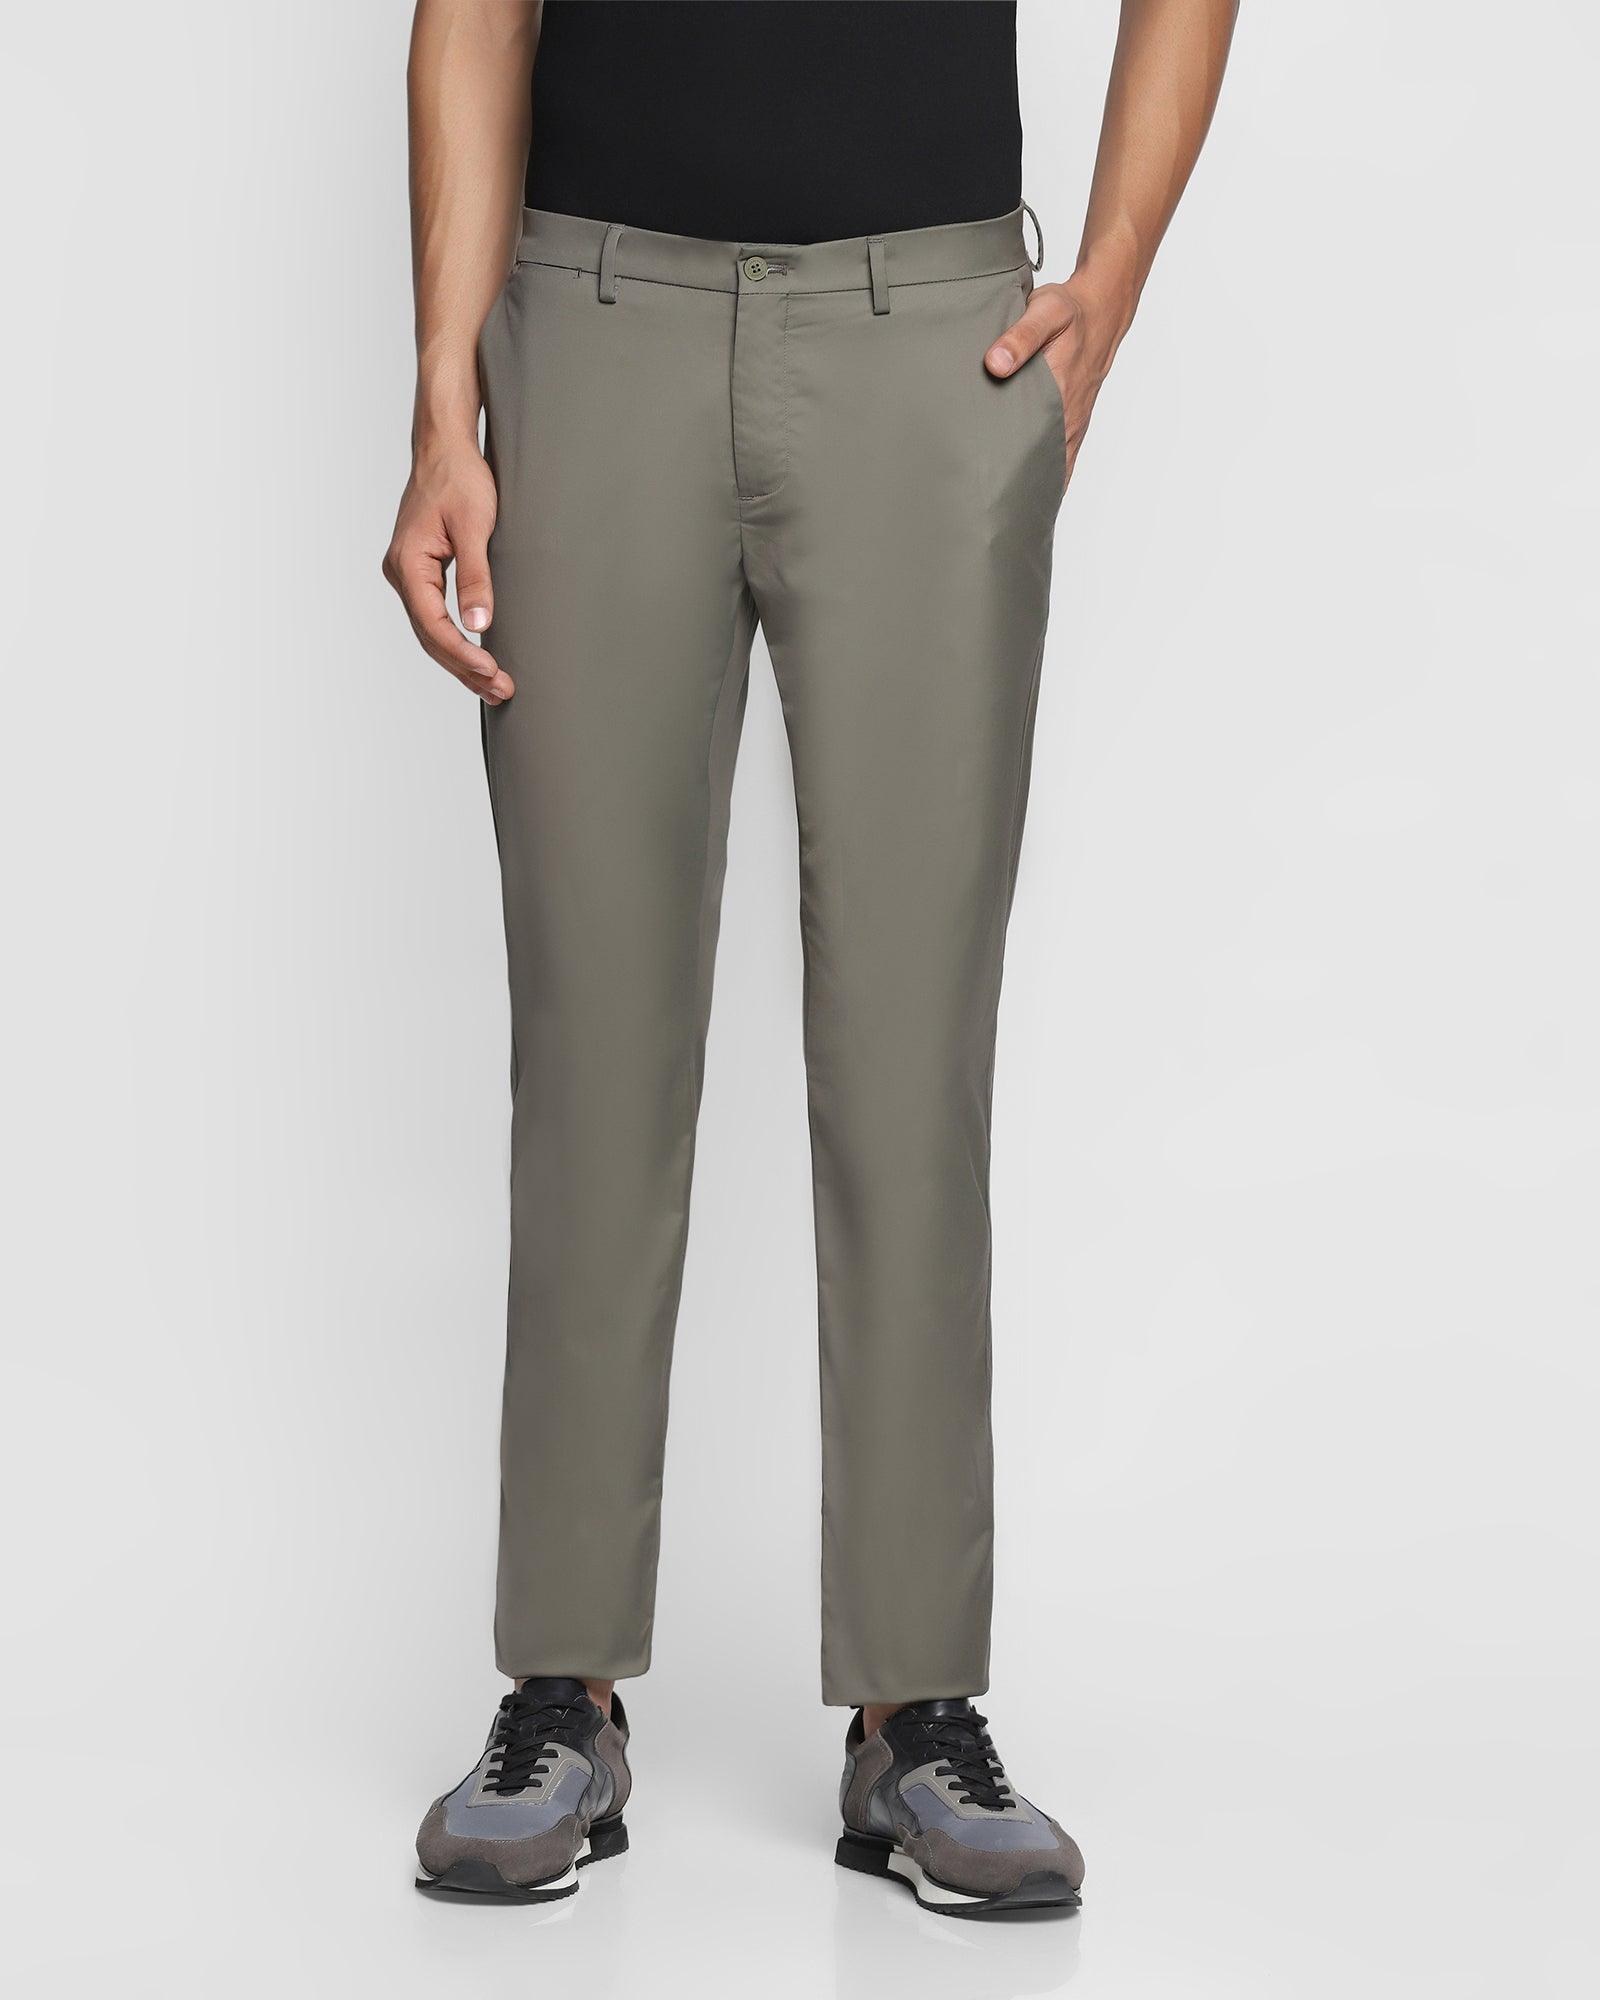 TechPro Slim Comfort B-95 Casual Olive Solid Khakis - Nord